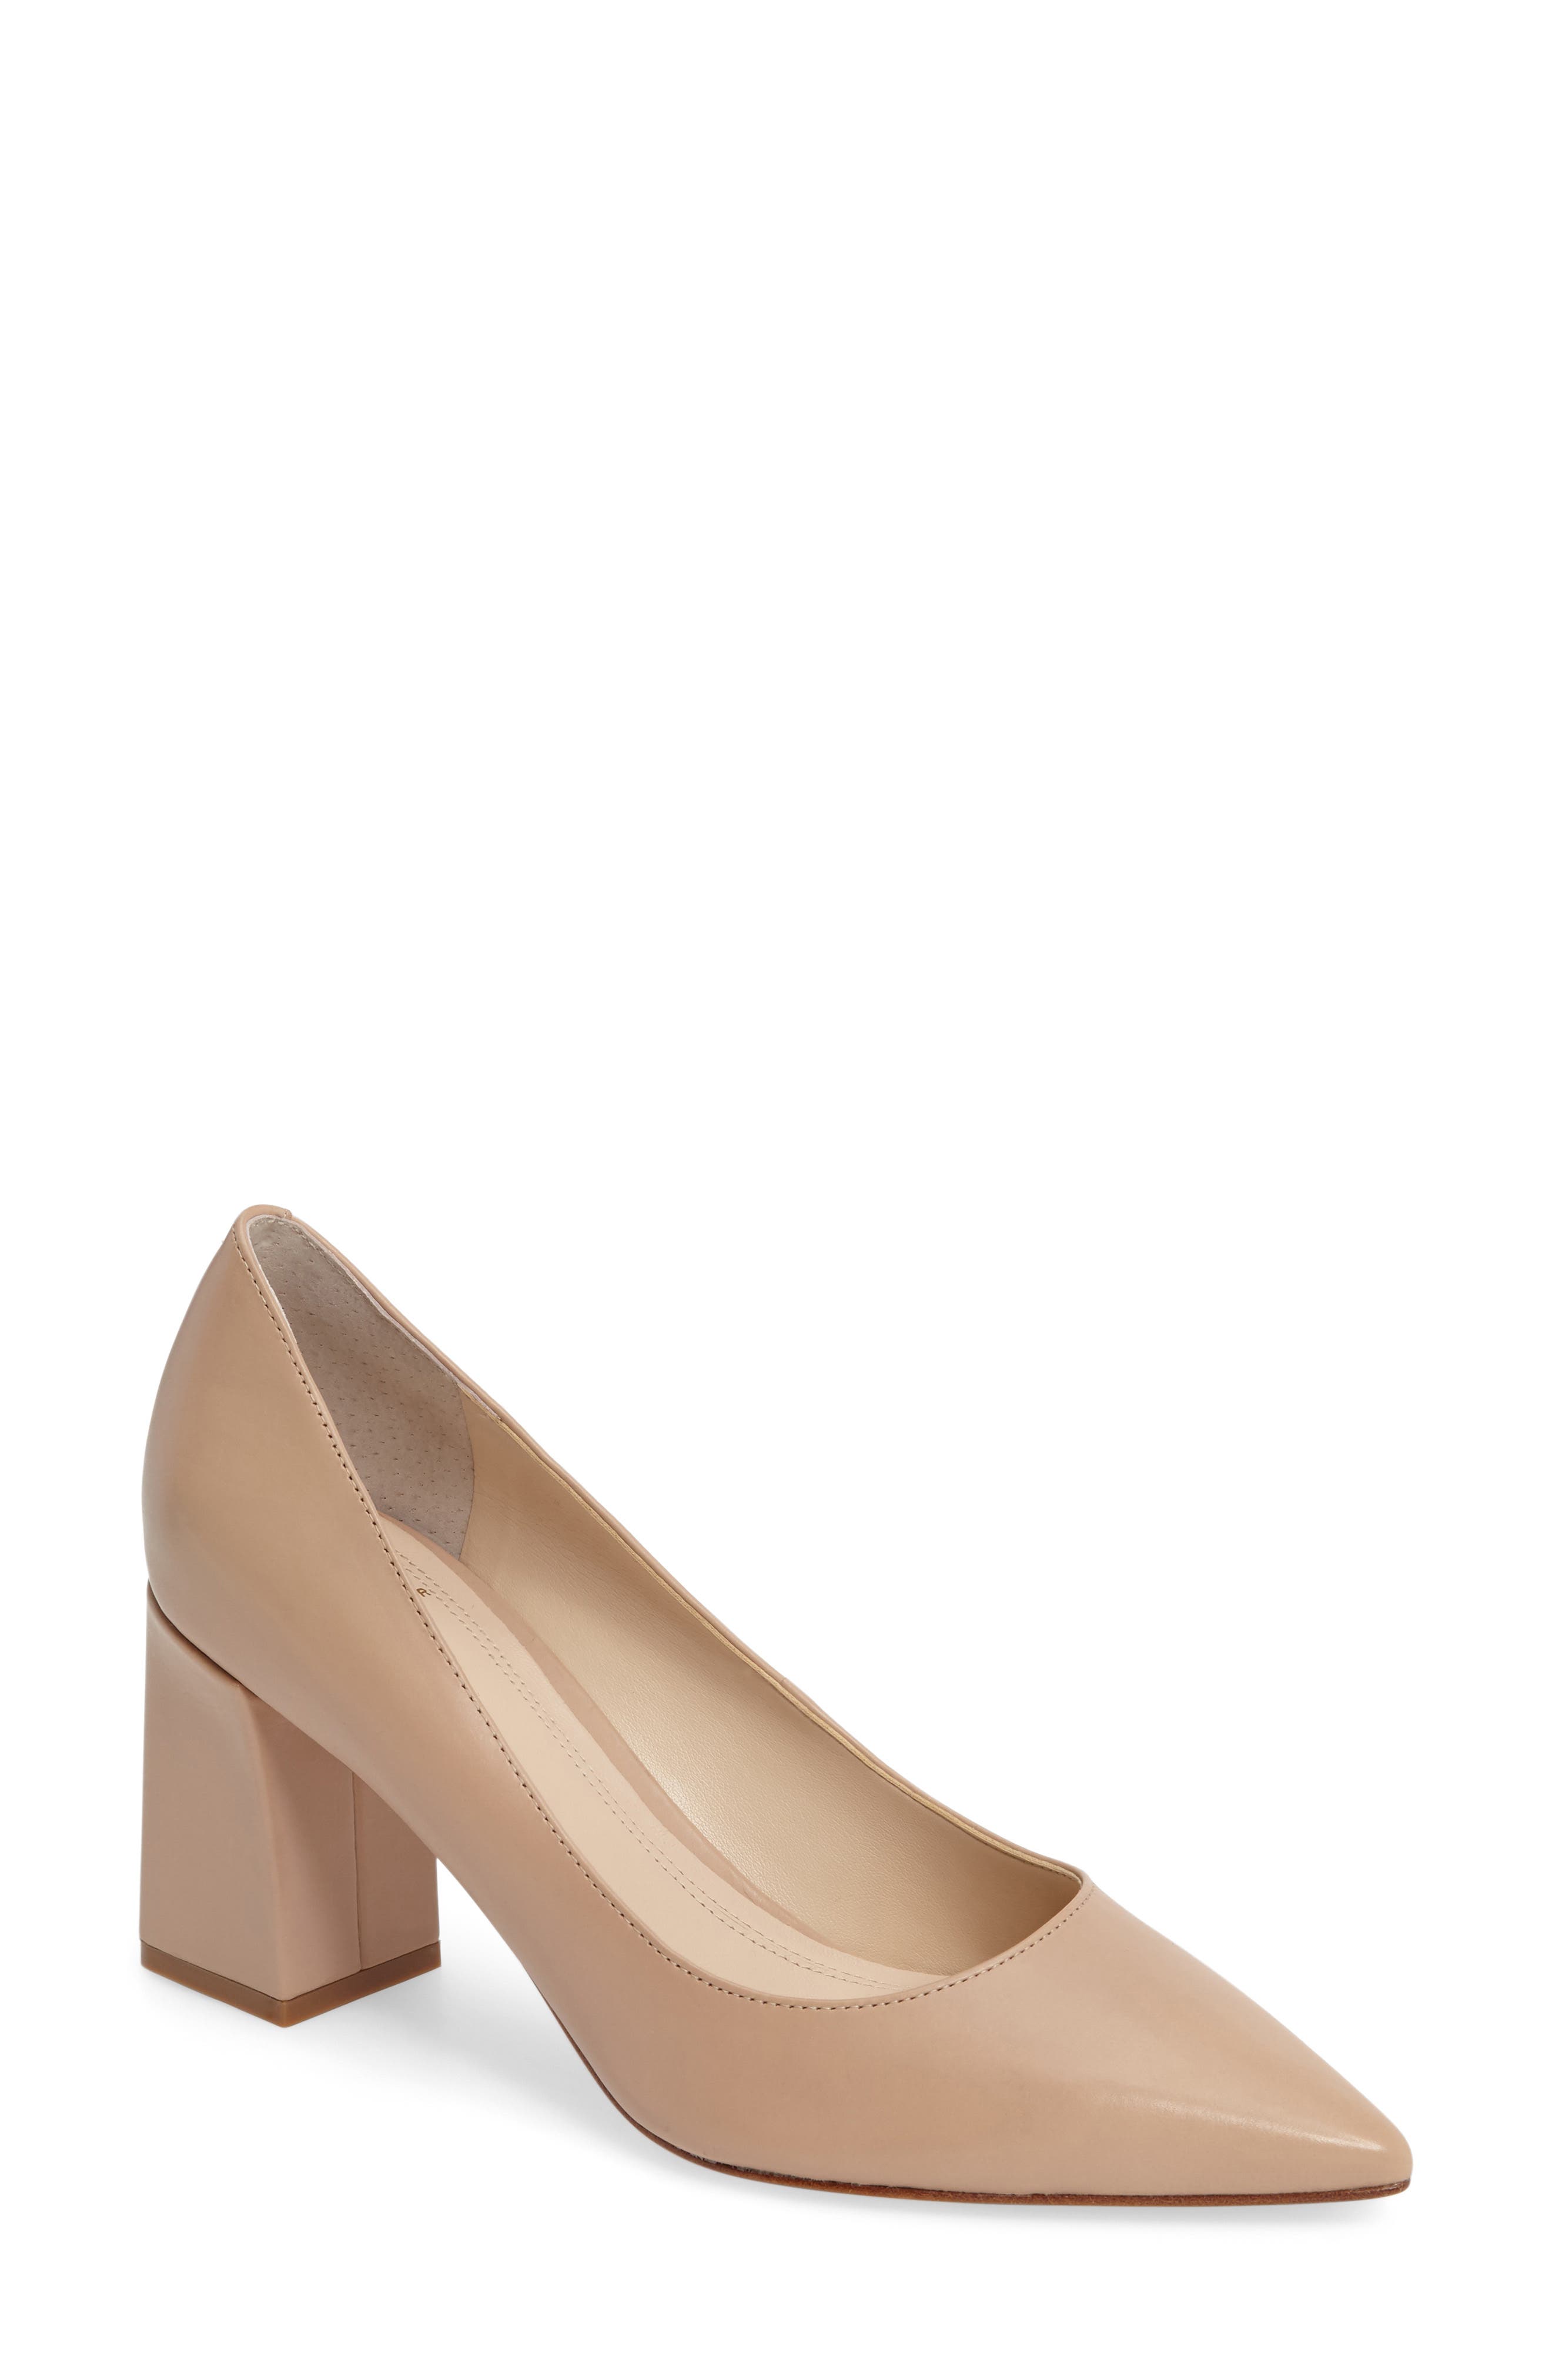 marc fisher navy pumps